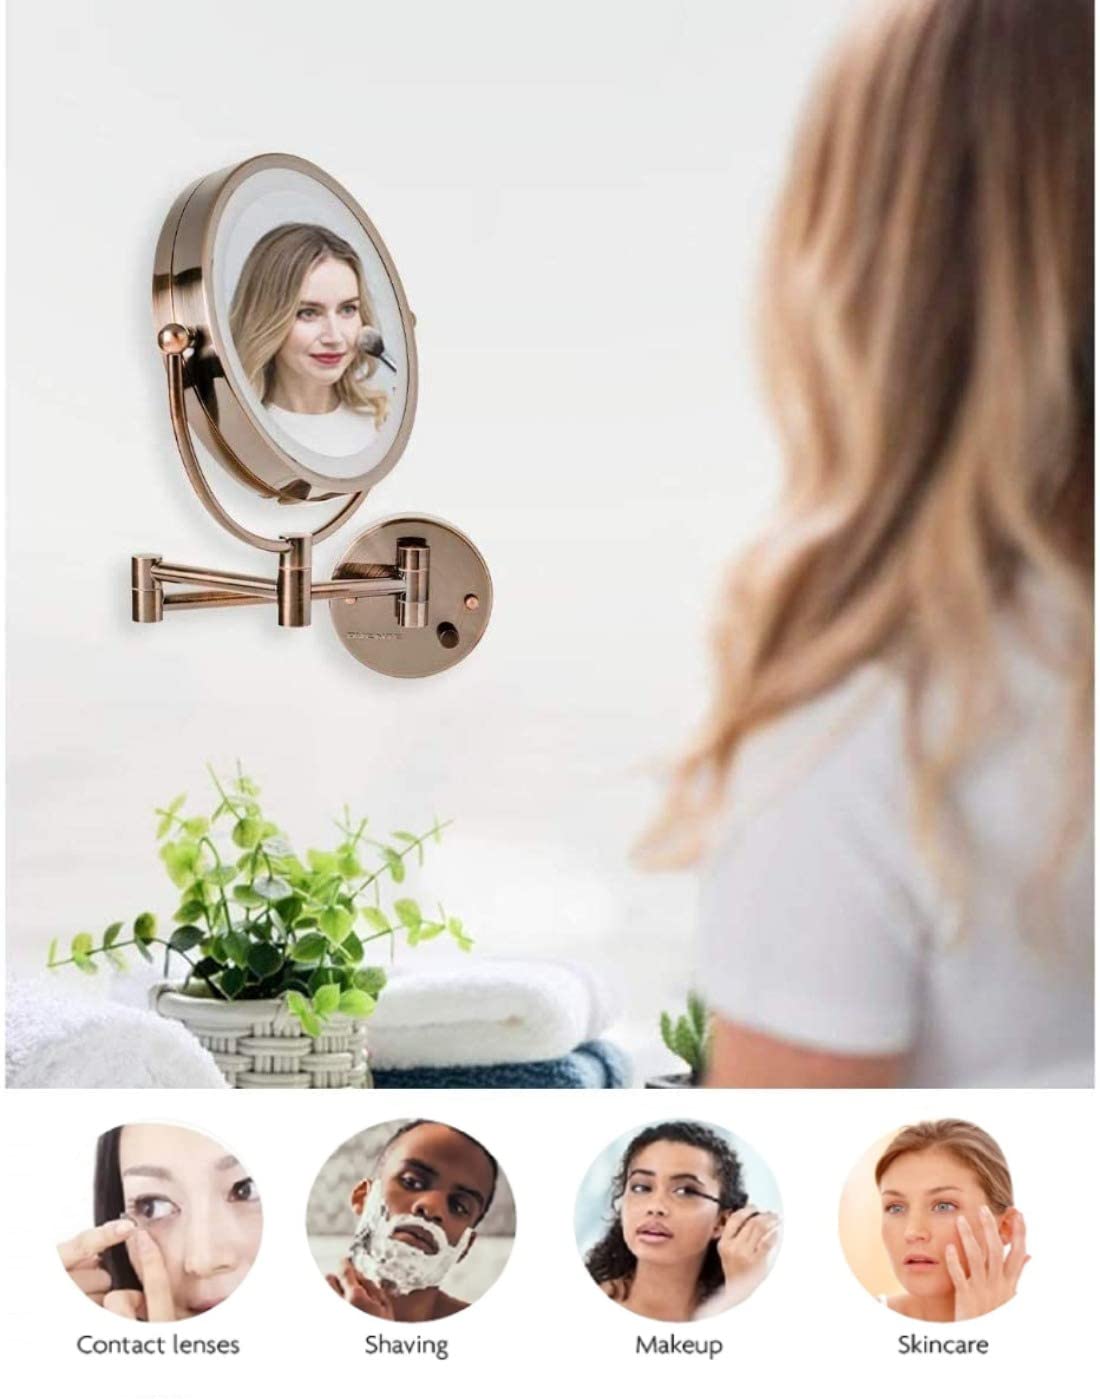 OVENTE 9" Lighted Wall Mount Makeup Mirror - 1X/ 7X Magnification, Hardwired Glow Cosmetic Light up Mirror, Spinning 360-Degree, Double Sided LED, Extendable, Folding Arm, Antique Brass MPWD3185AB1X7X